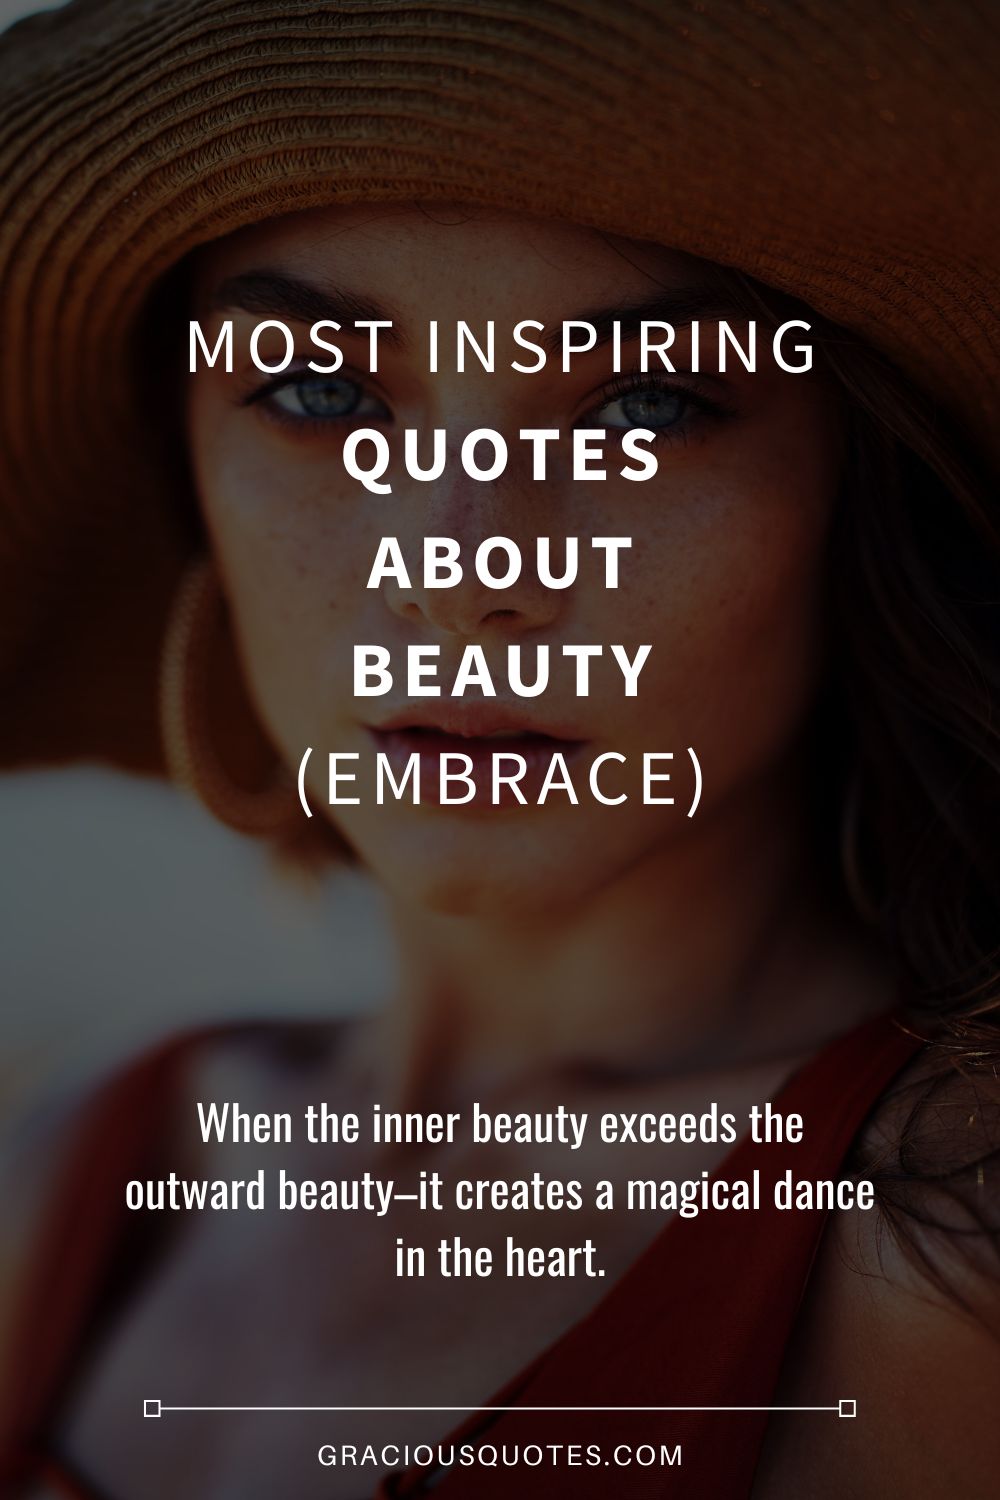 Most Inspiring Quotes About Beauty (EMBRACE) - Gracious Quotes